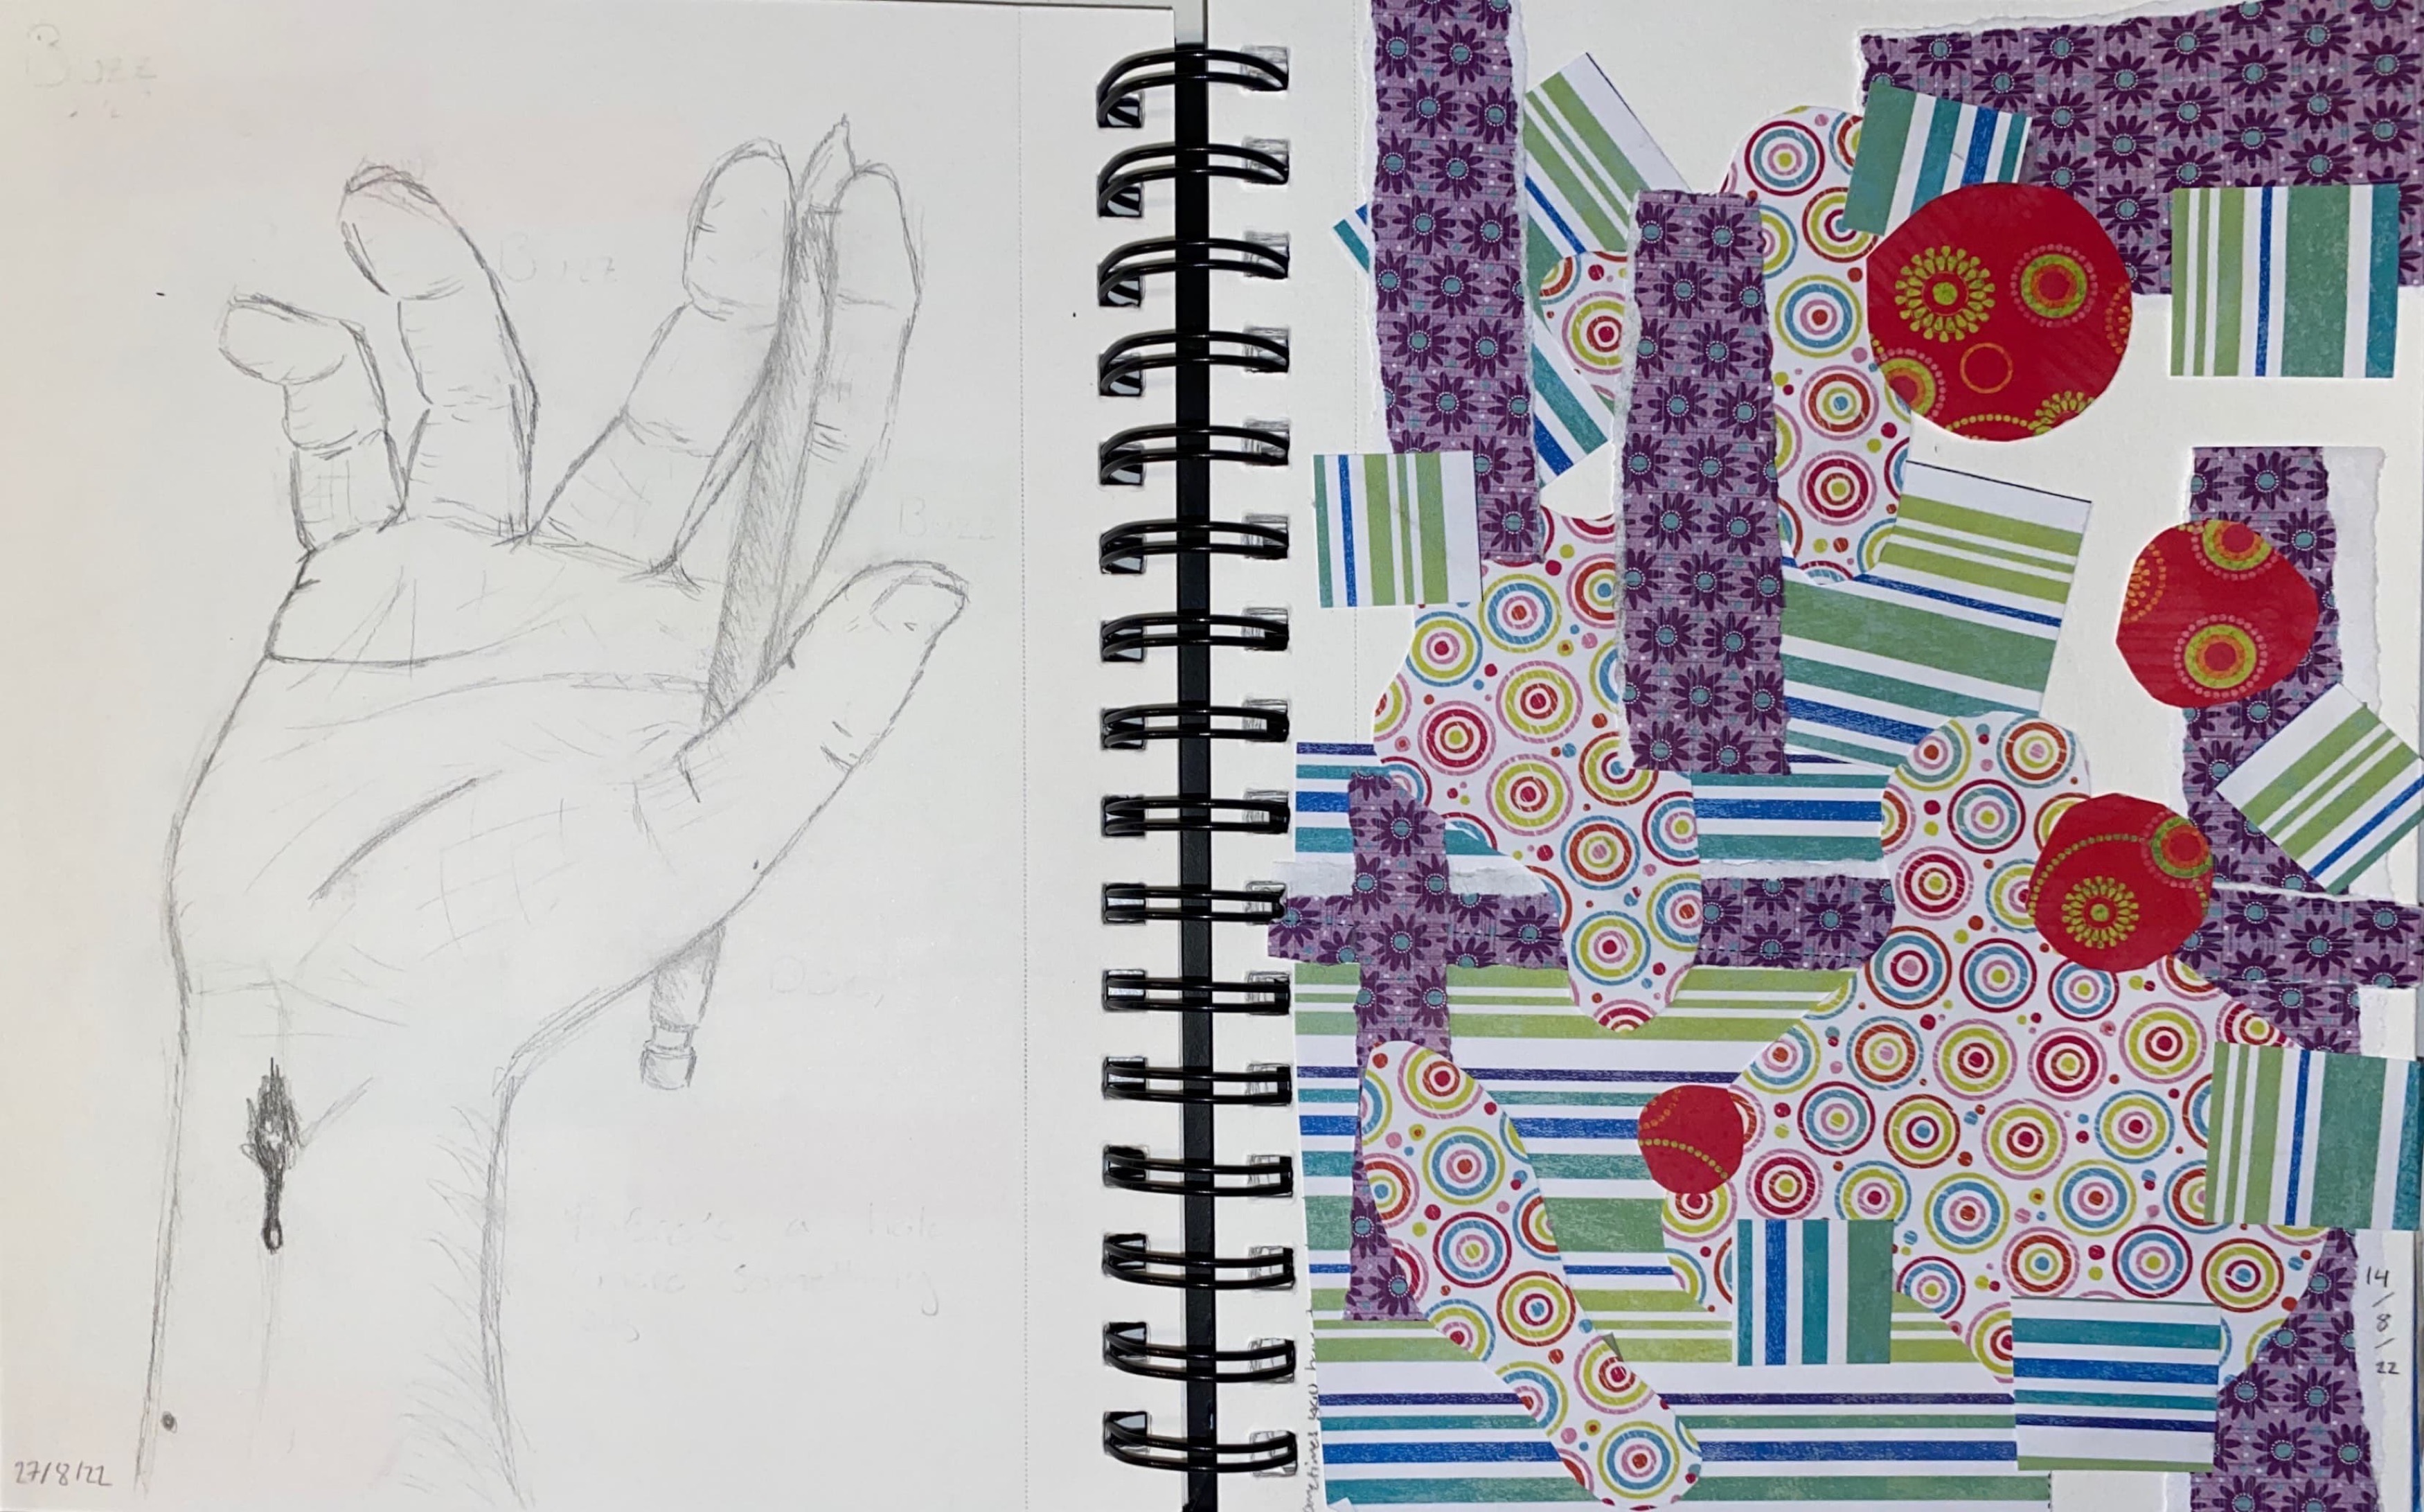 2 pages: a hand with stigmata holding a pencil and a multicoloured collage